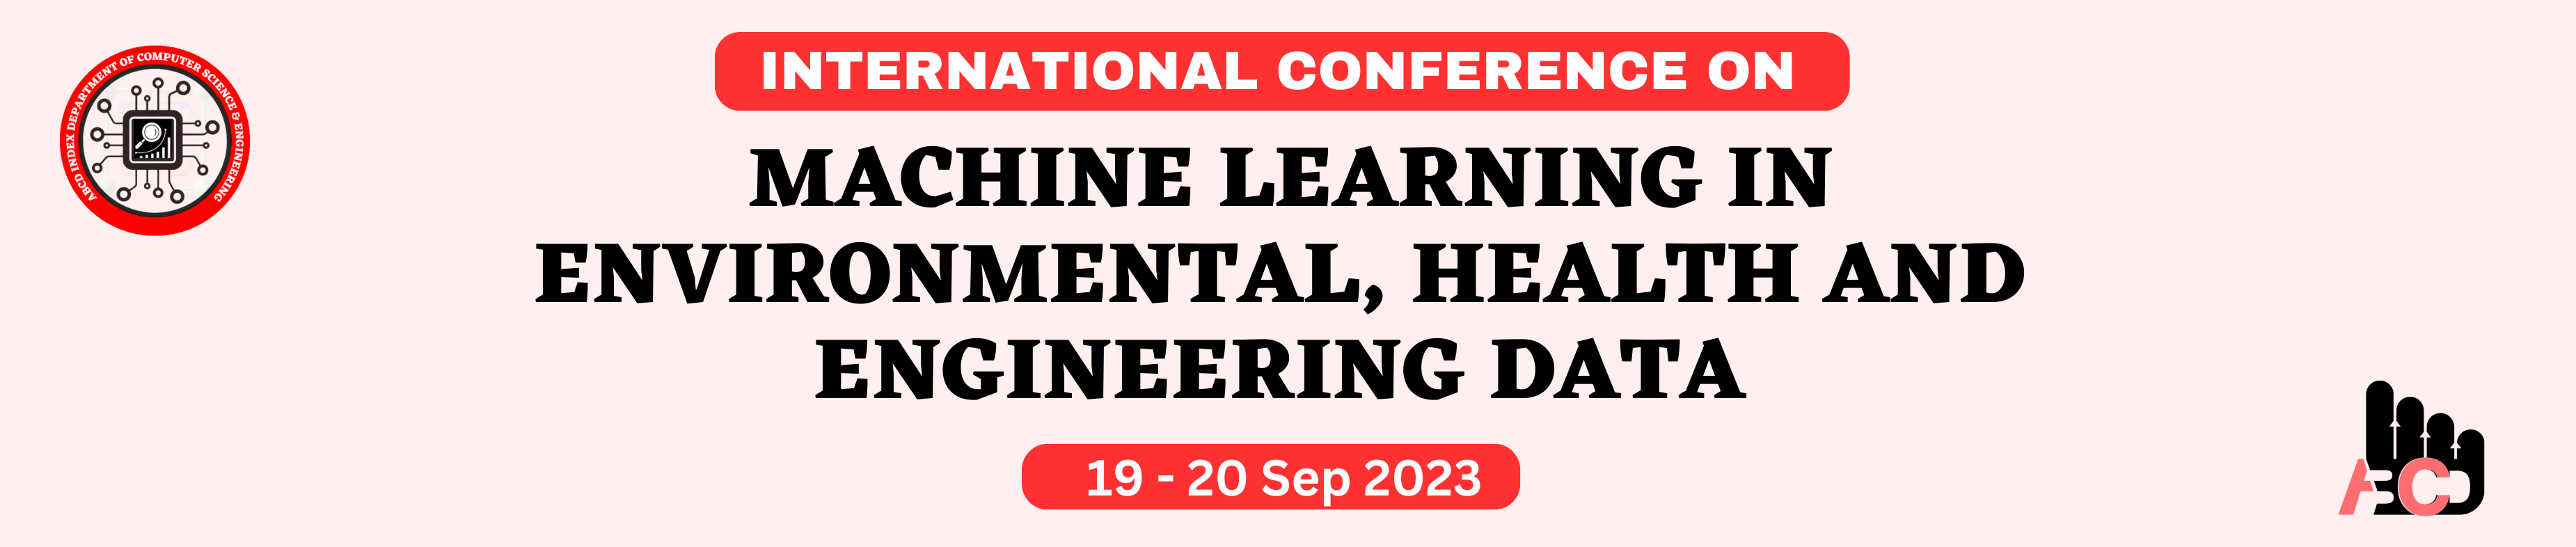 International Conference on Machine learning in Health, Environment and Engineering Data (ICMLHEED), Bhopal, Madhya Pradesh, India